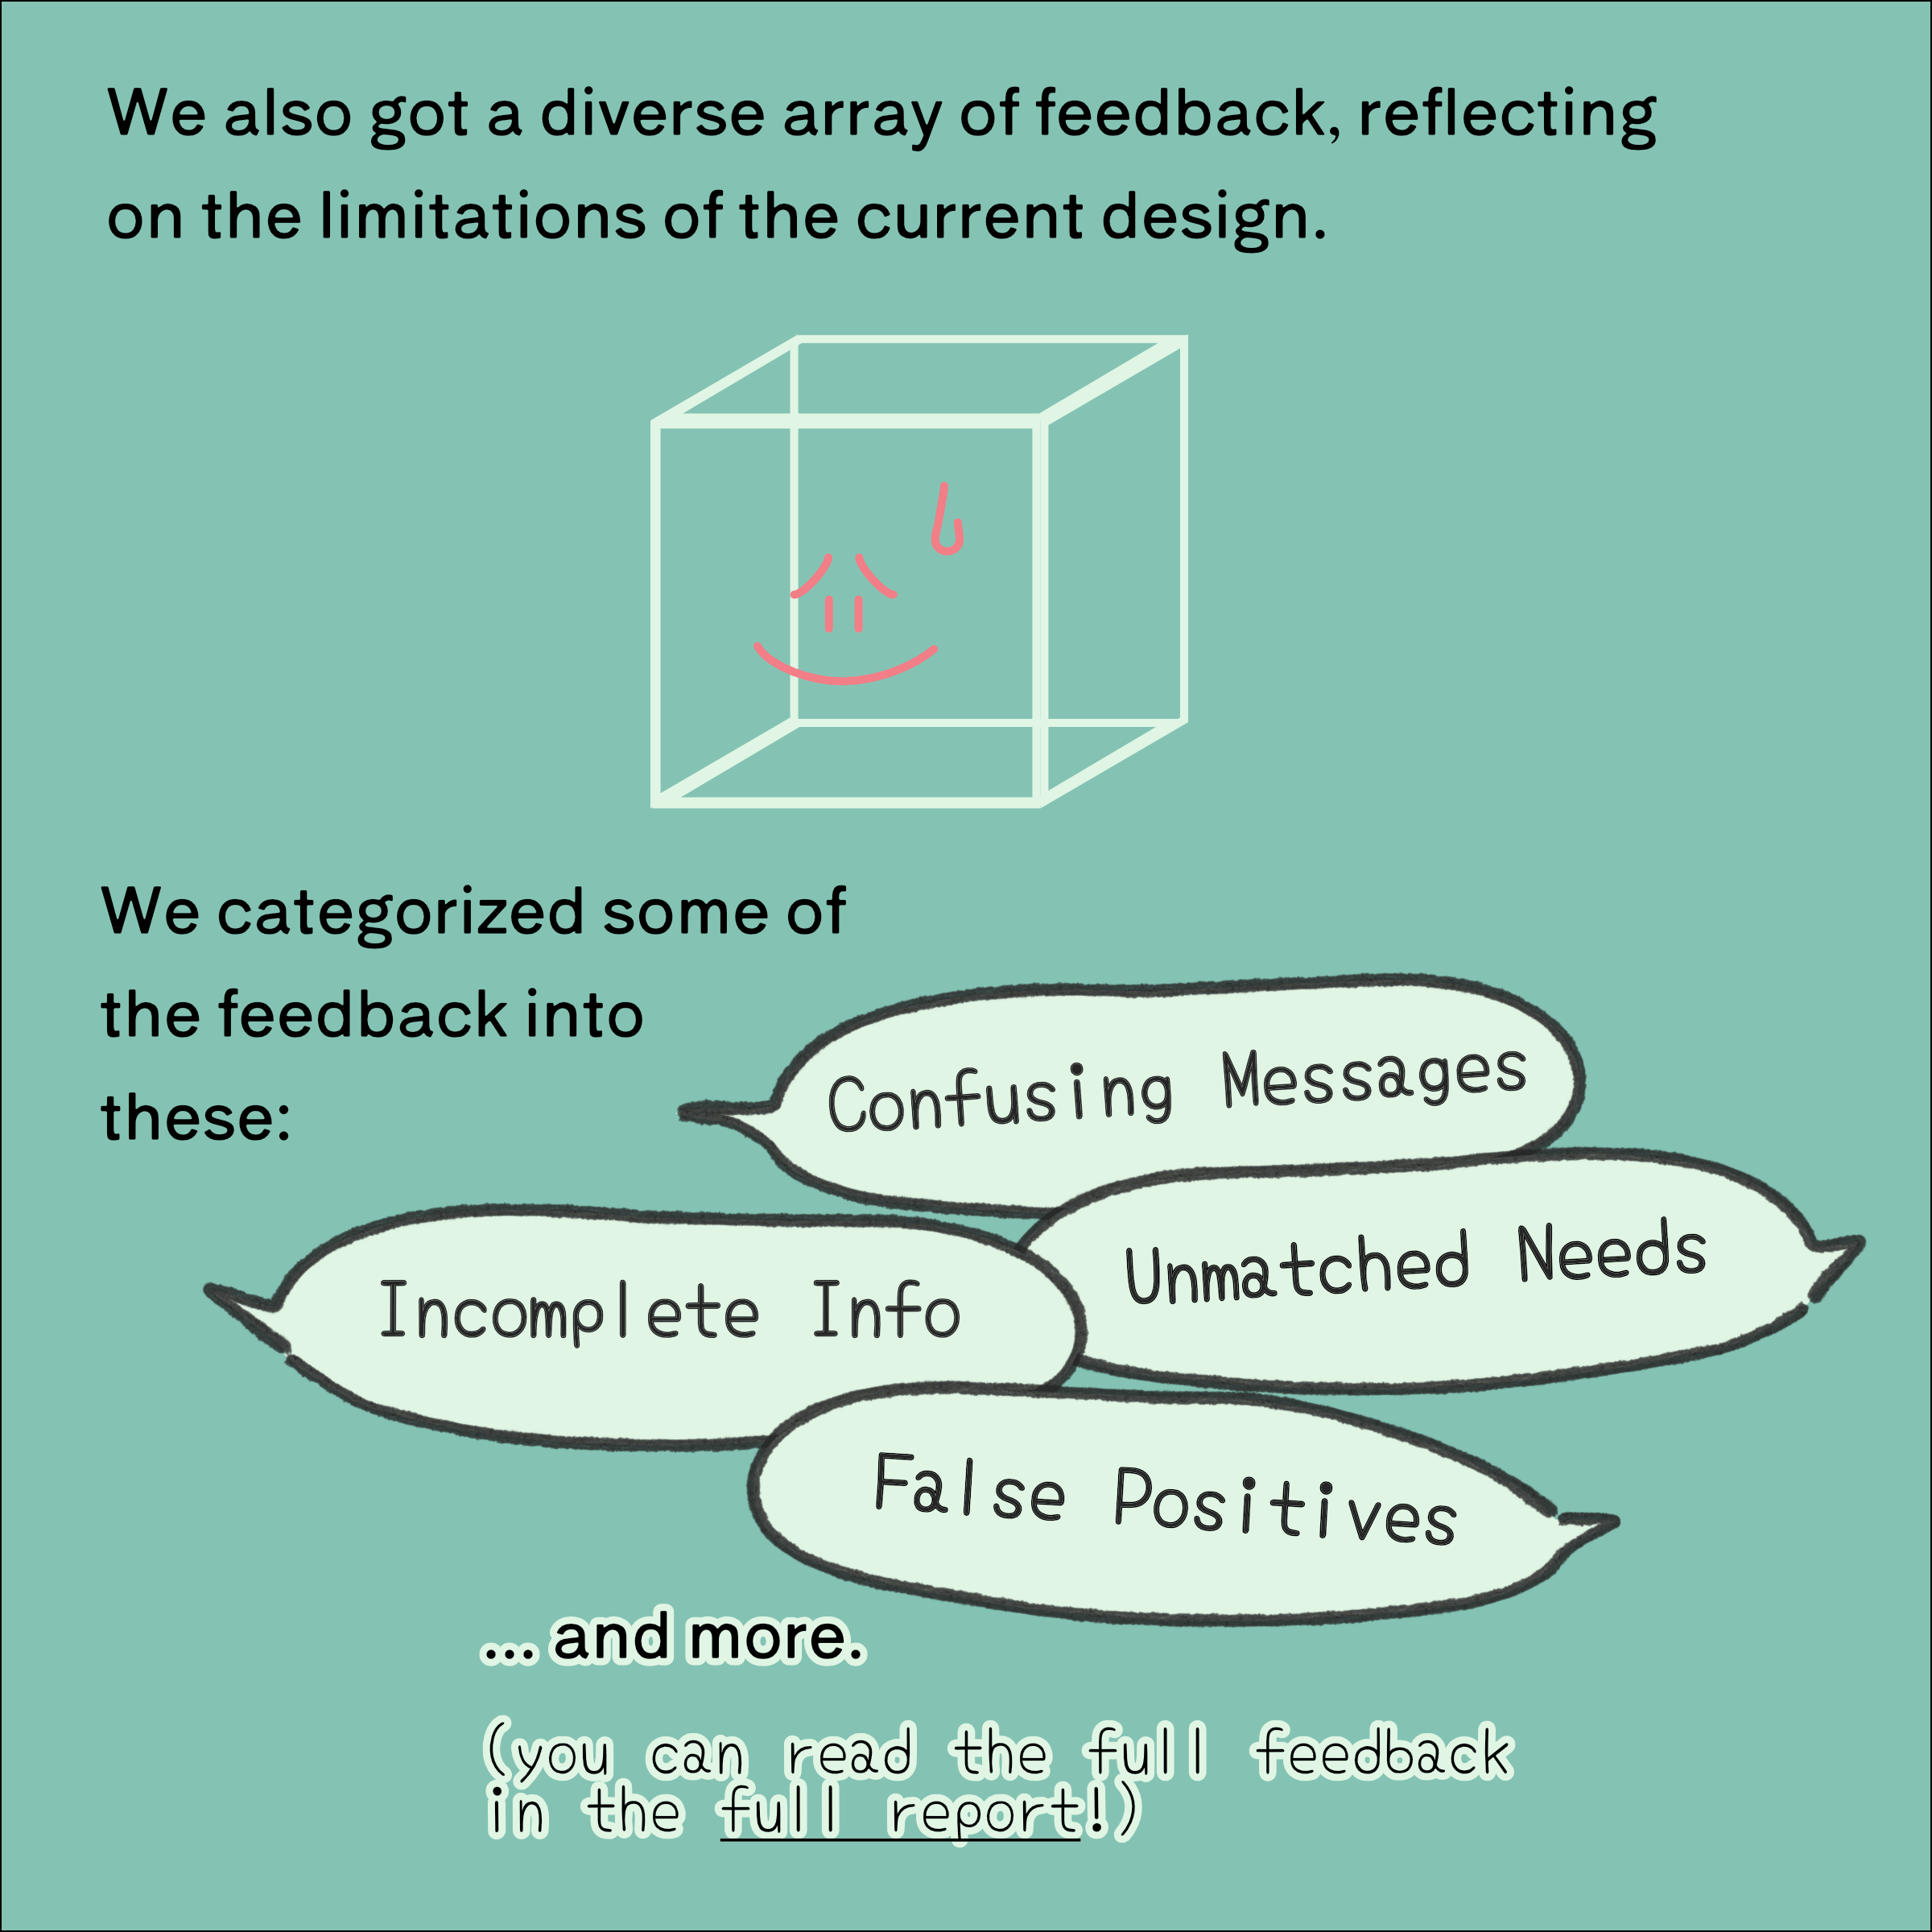 We also got a diverse array of feedback, reflecting on the limitations of the current design. We categorized some of the feedback into these: Confusing Messages, Unmatched Needs, Incomplete Info, False Positives ... and more. (you can read the full list of feedback at: https://observablehq.com/@almchung/2022-p5jsfes-survey#cell-1951)